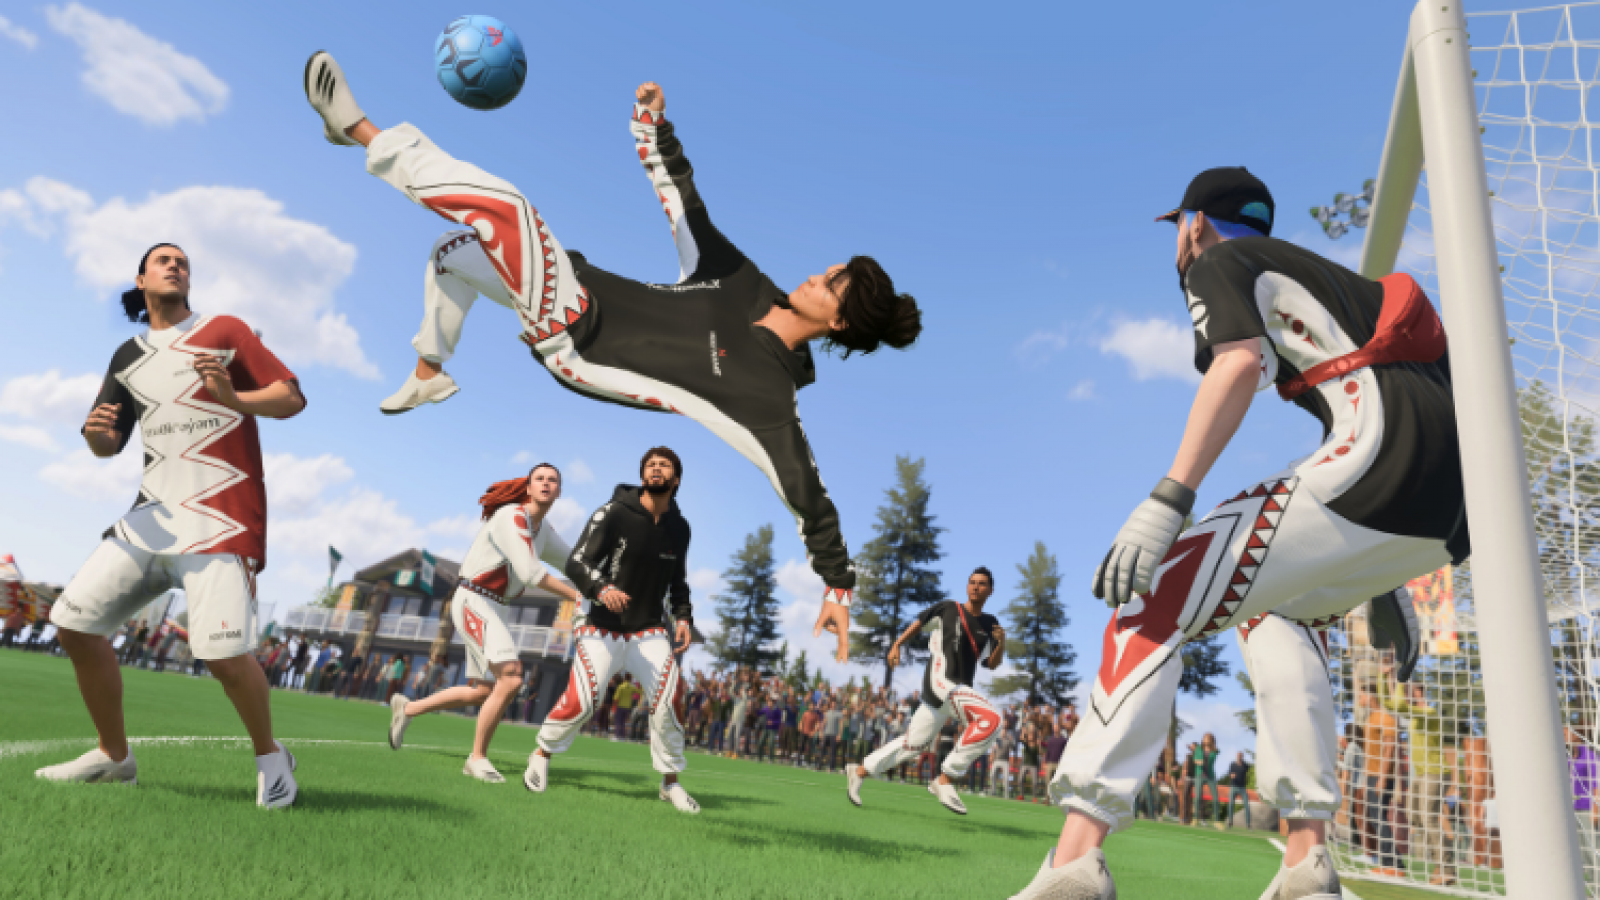 In-game image of players wearing Musqueam gear designed by Cole Sparrow-Crawford